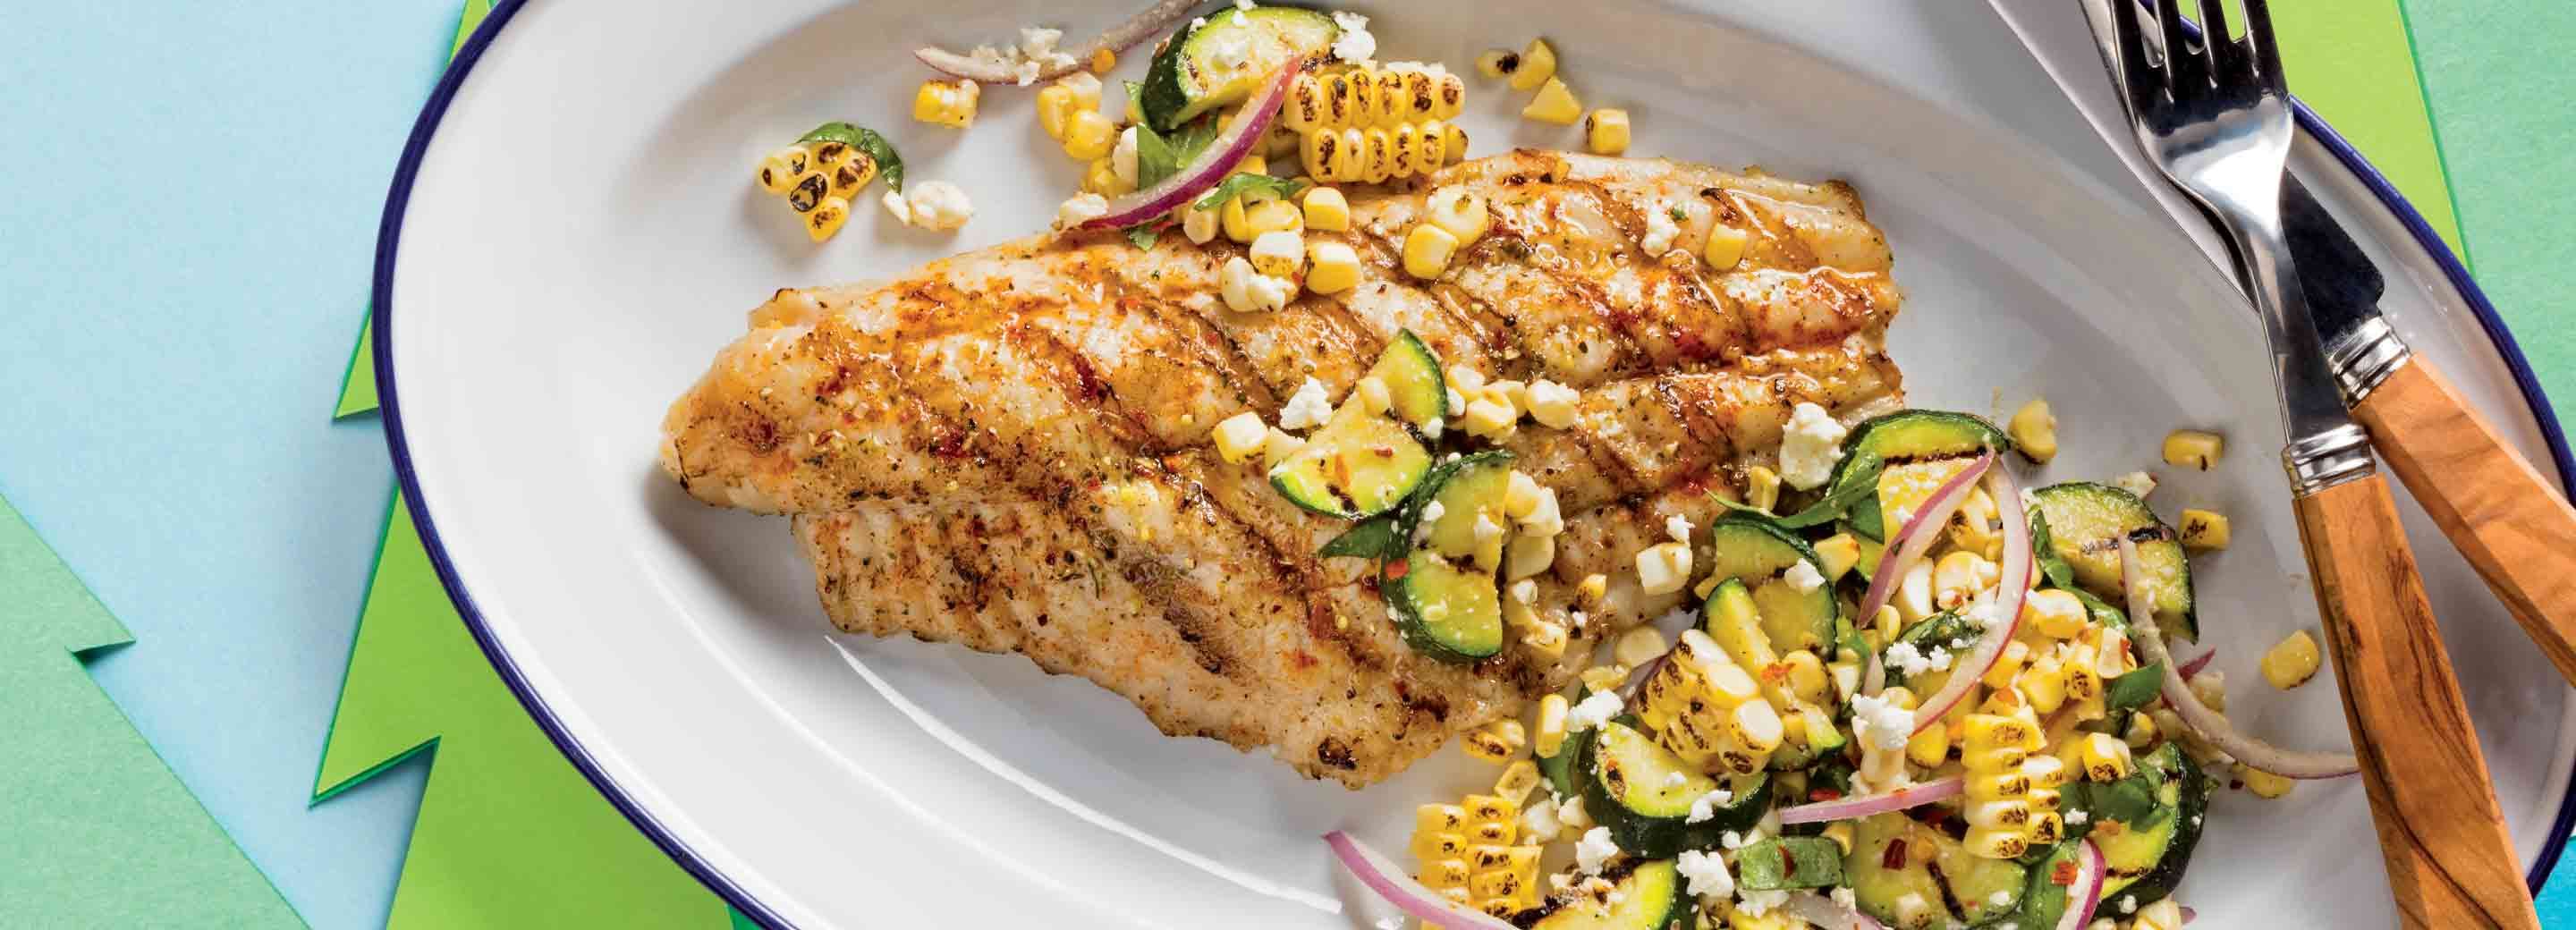 Grilled Marinated Catfish Fillets